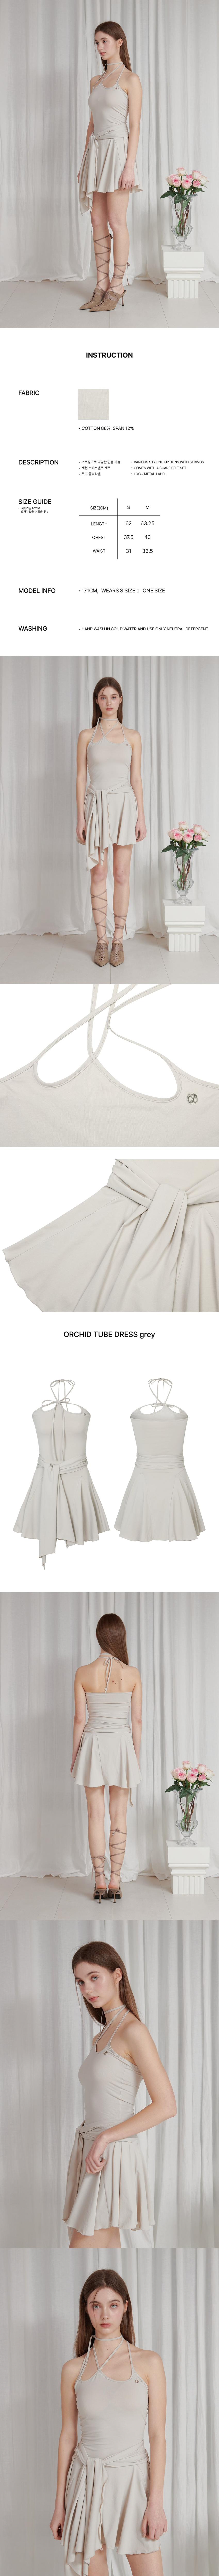 ORCHID TUBE DRESS grey